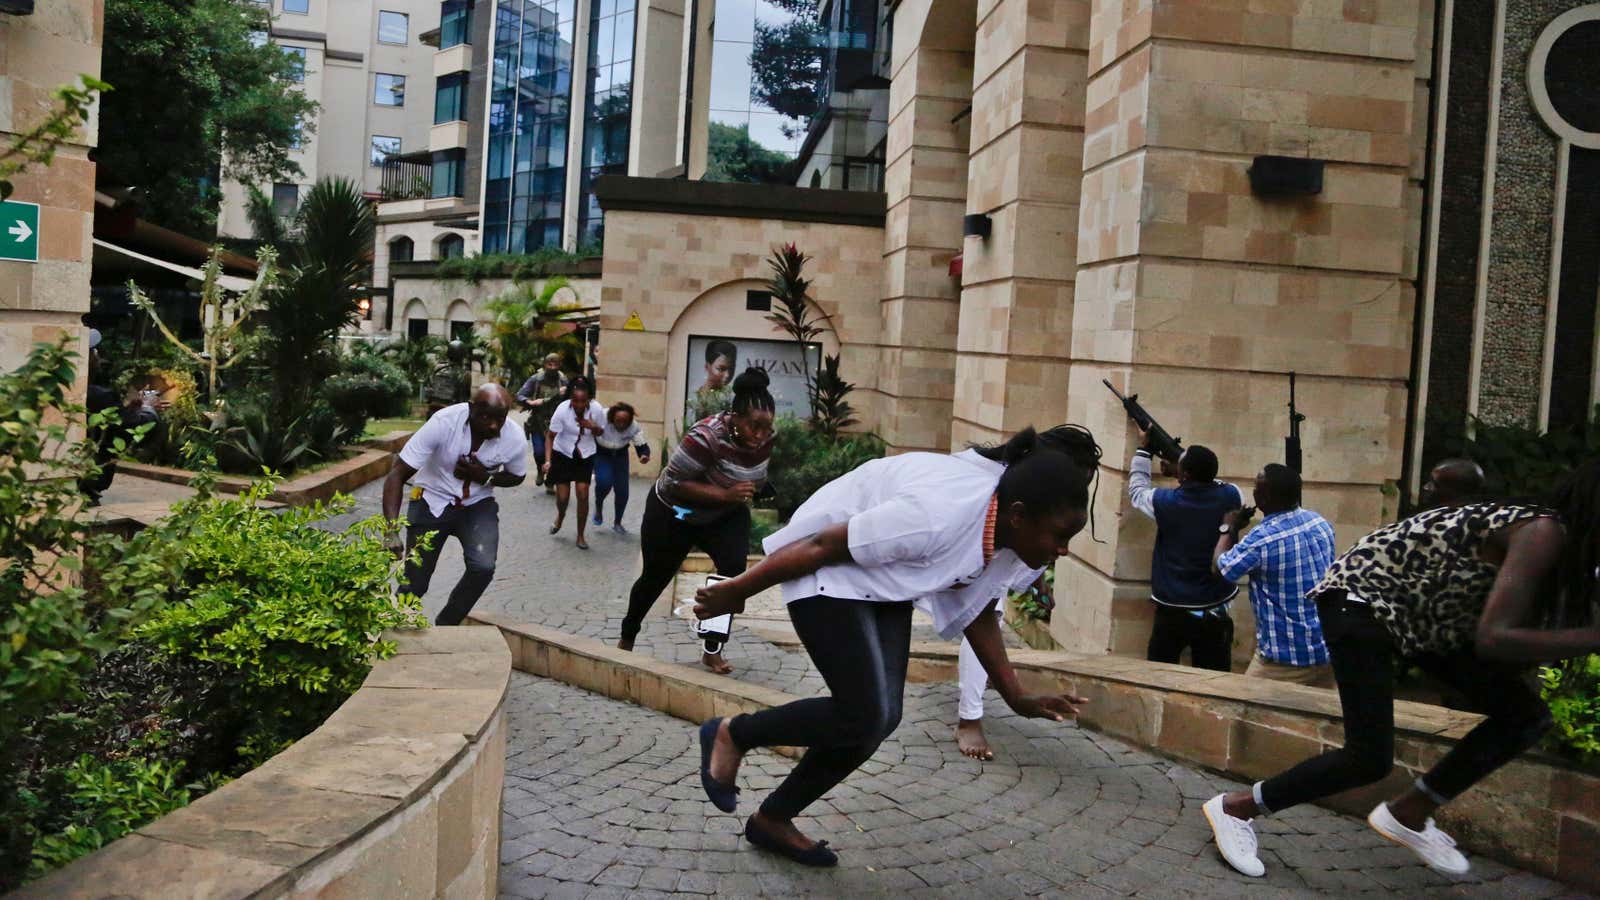 Another photo from the Nairobi attack by AP photographer Khalil Senosi who’s more graphic photo was used by by New York Times and the Daily Mail.